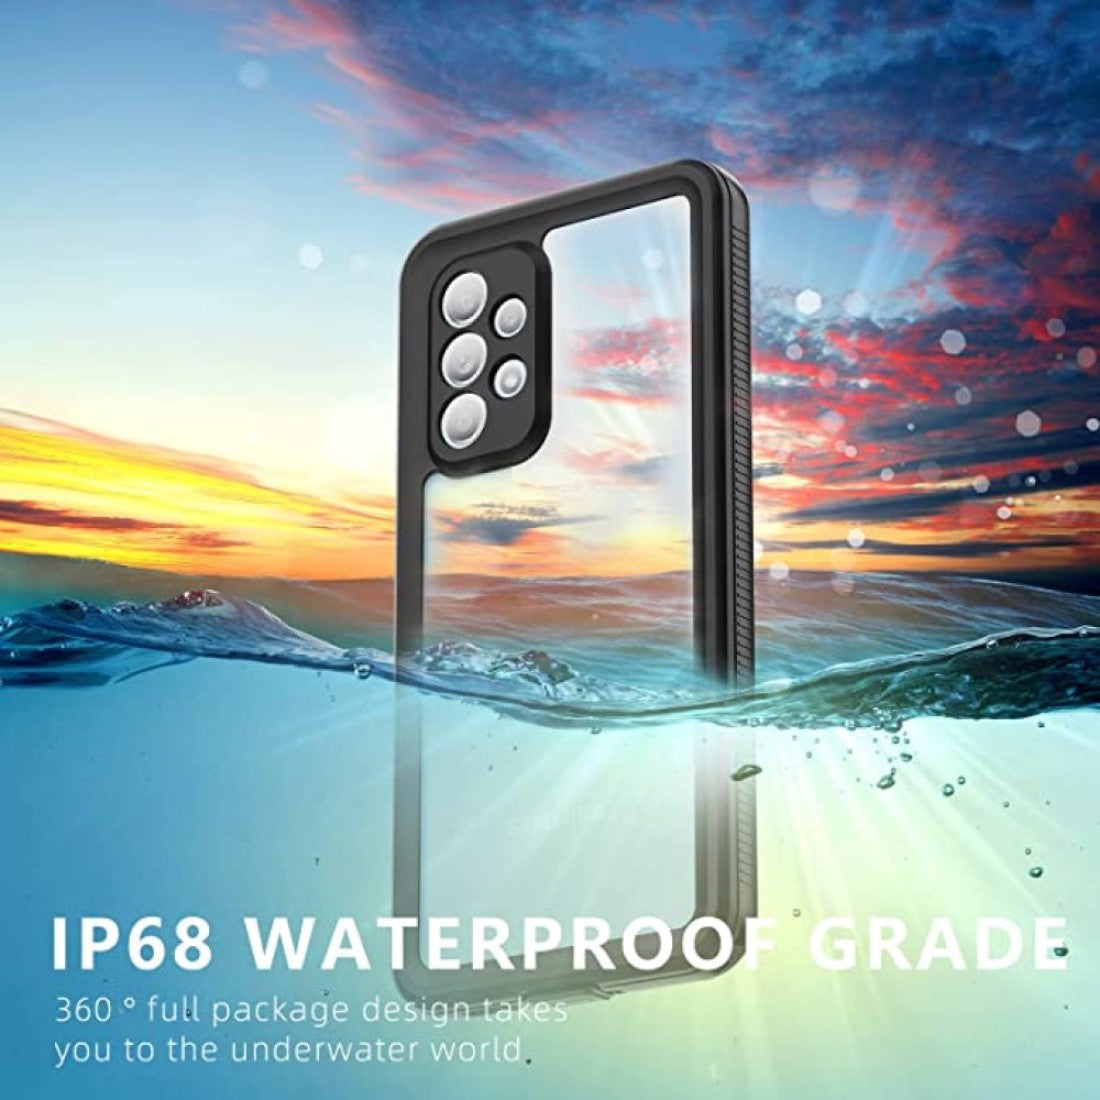 Waterproof Slim Life Proof Case for Samsung Note 20 Built-in Screen Protector Shockproof Dustproof Heavy Duty Full Body Protective Case